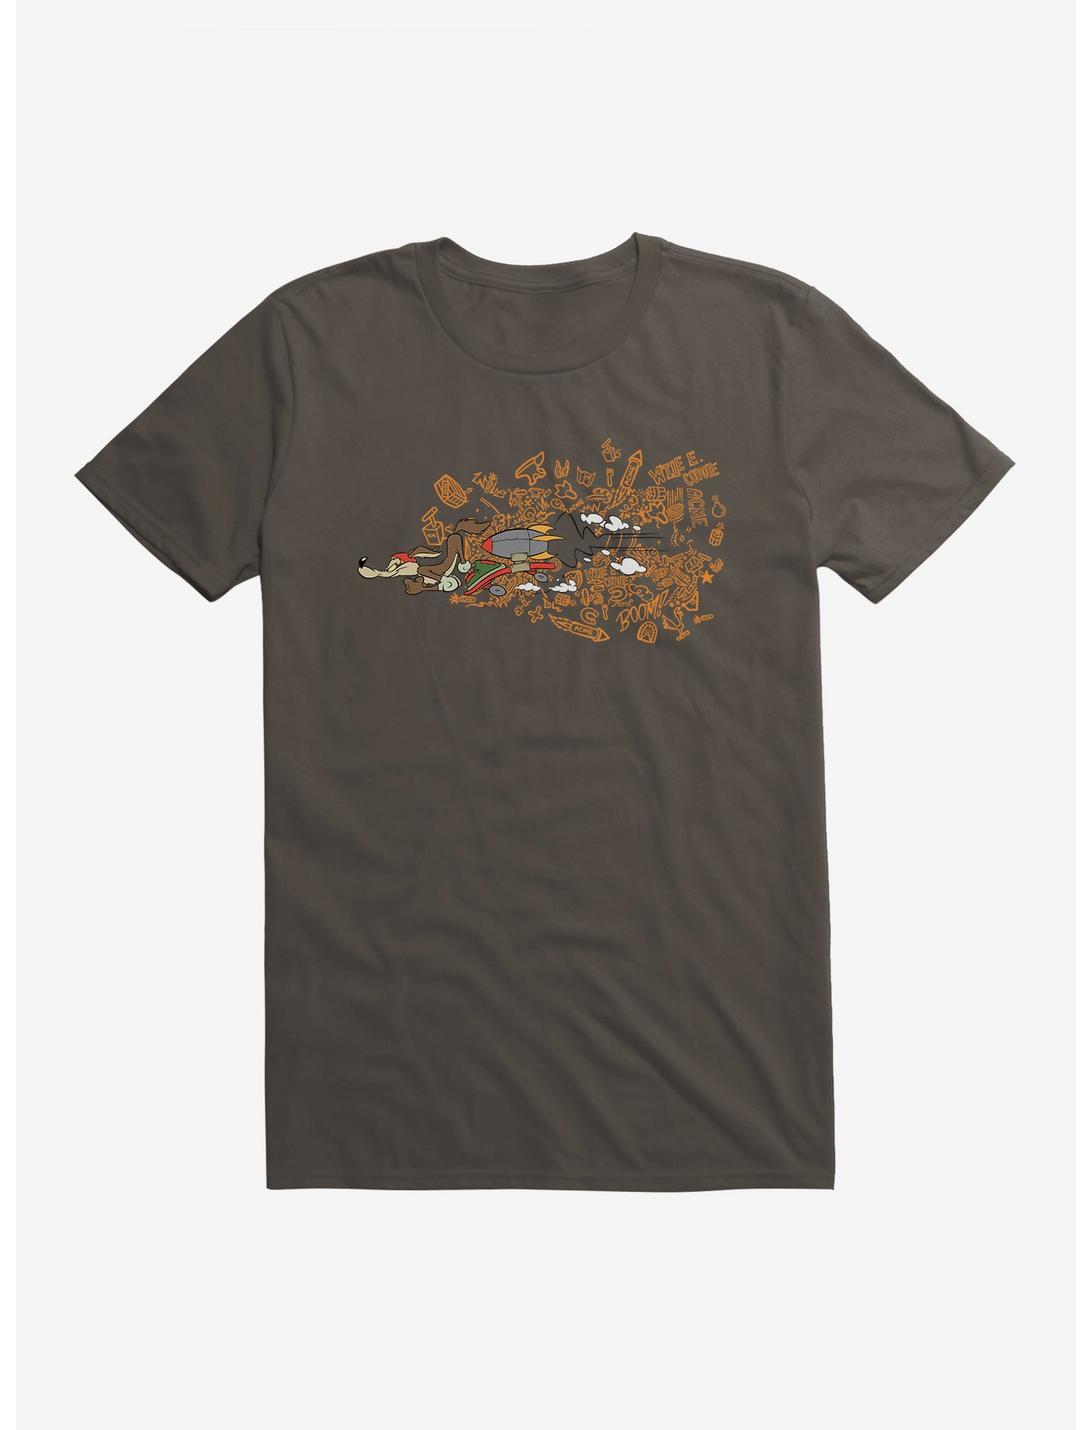 Looney Tunes Wile E. Coyote T-Shirt, , hi-res